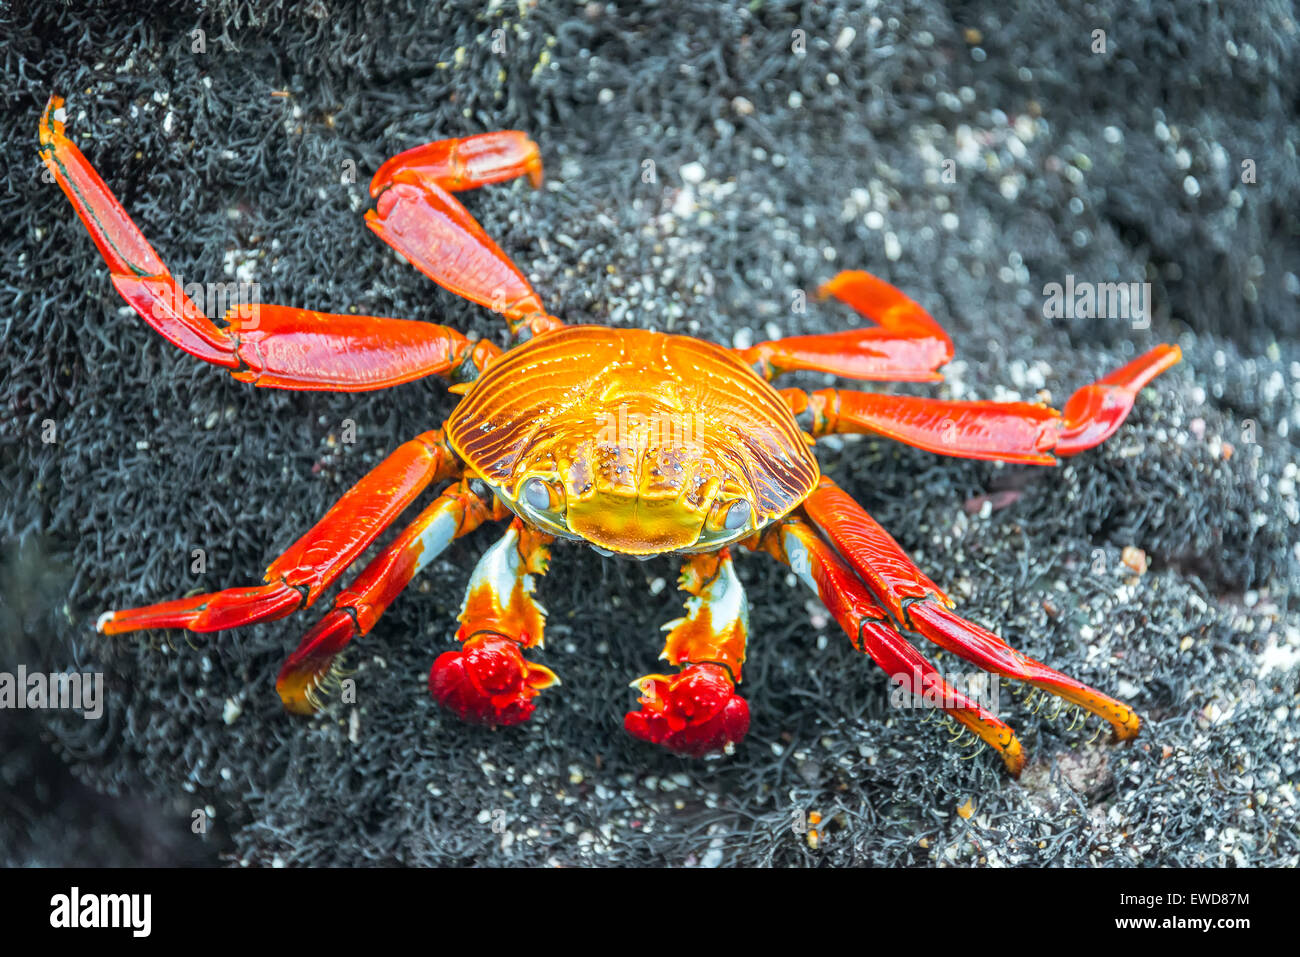 Closeup view of a Sally Lightfoot Crab on Isabela Island in the Galapagos Islands in Ecuador Stock Photo